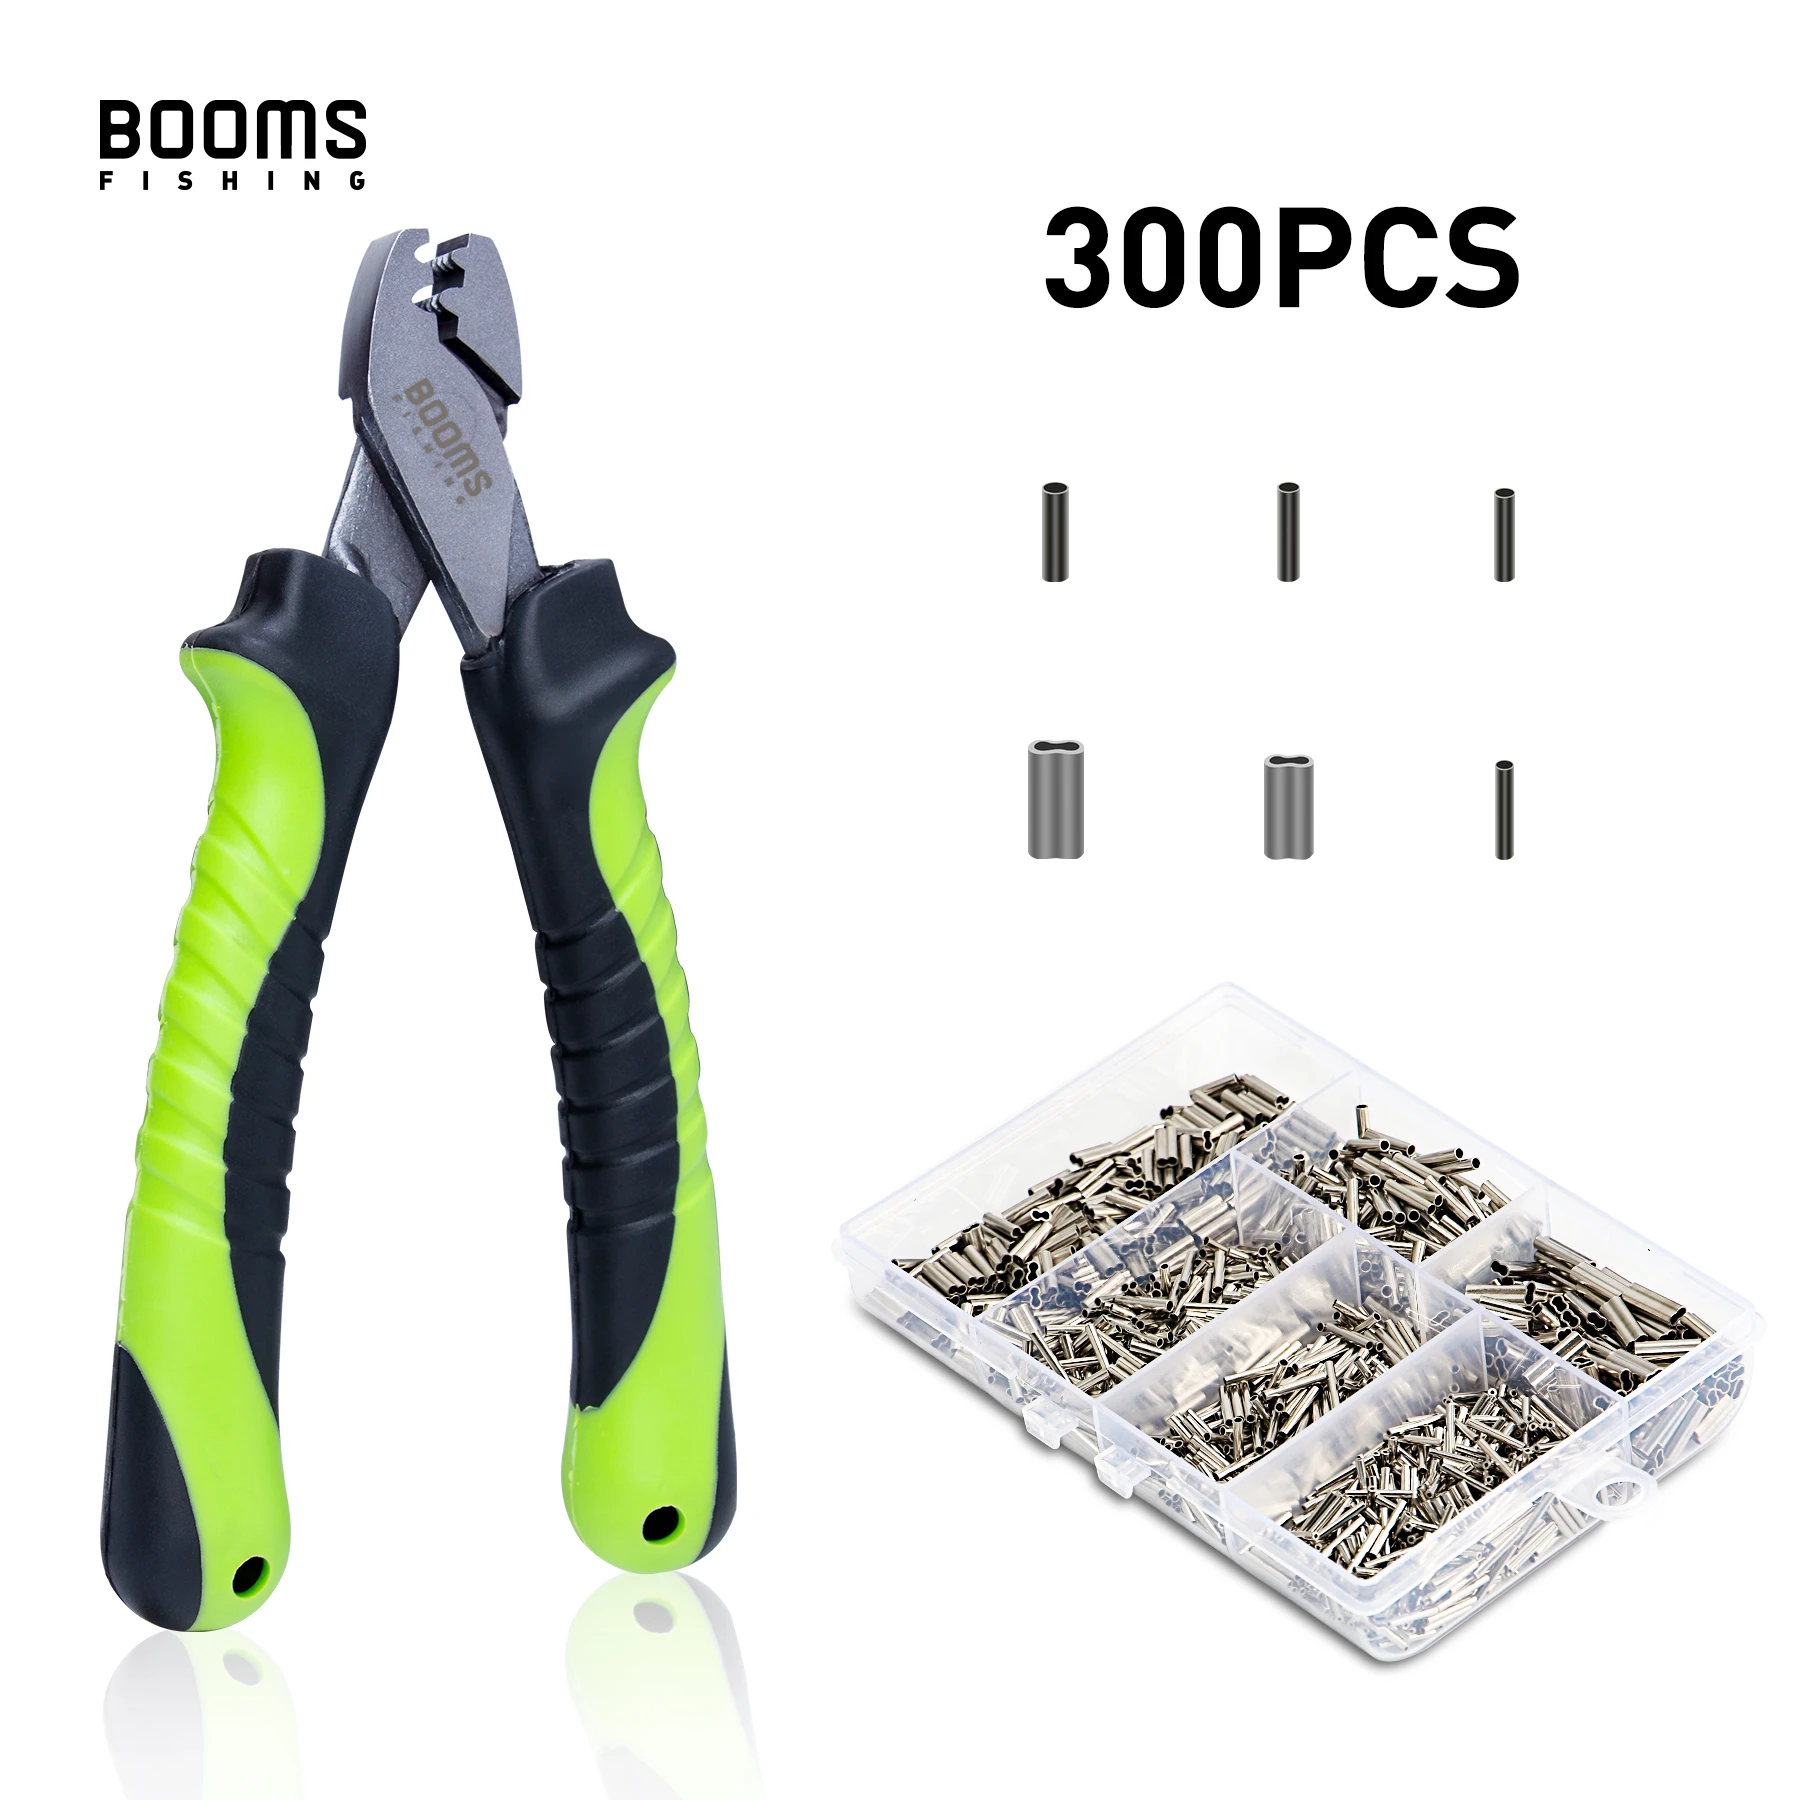 Booms Fishing CP2 Fishing Crimping Pliers with 300Pcs/set for Single & Double 6 Size Fishing Line Barrel Crimping Sleeves Tools